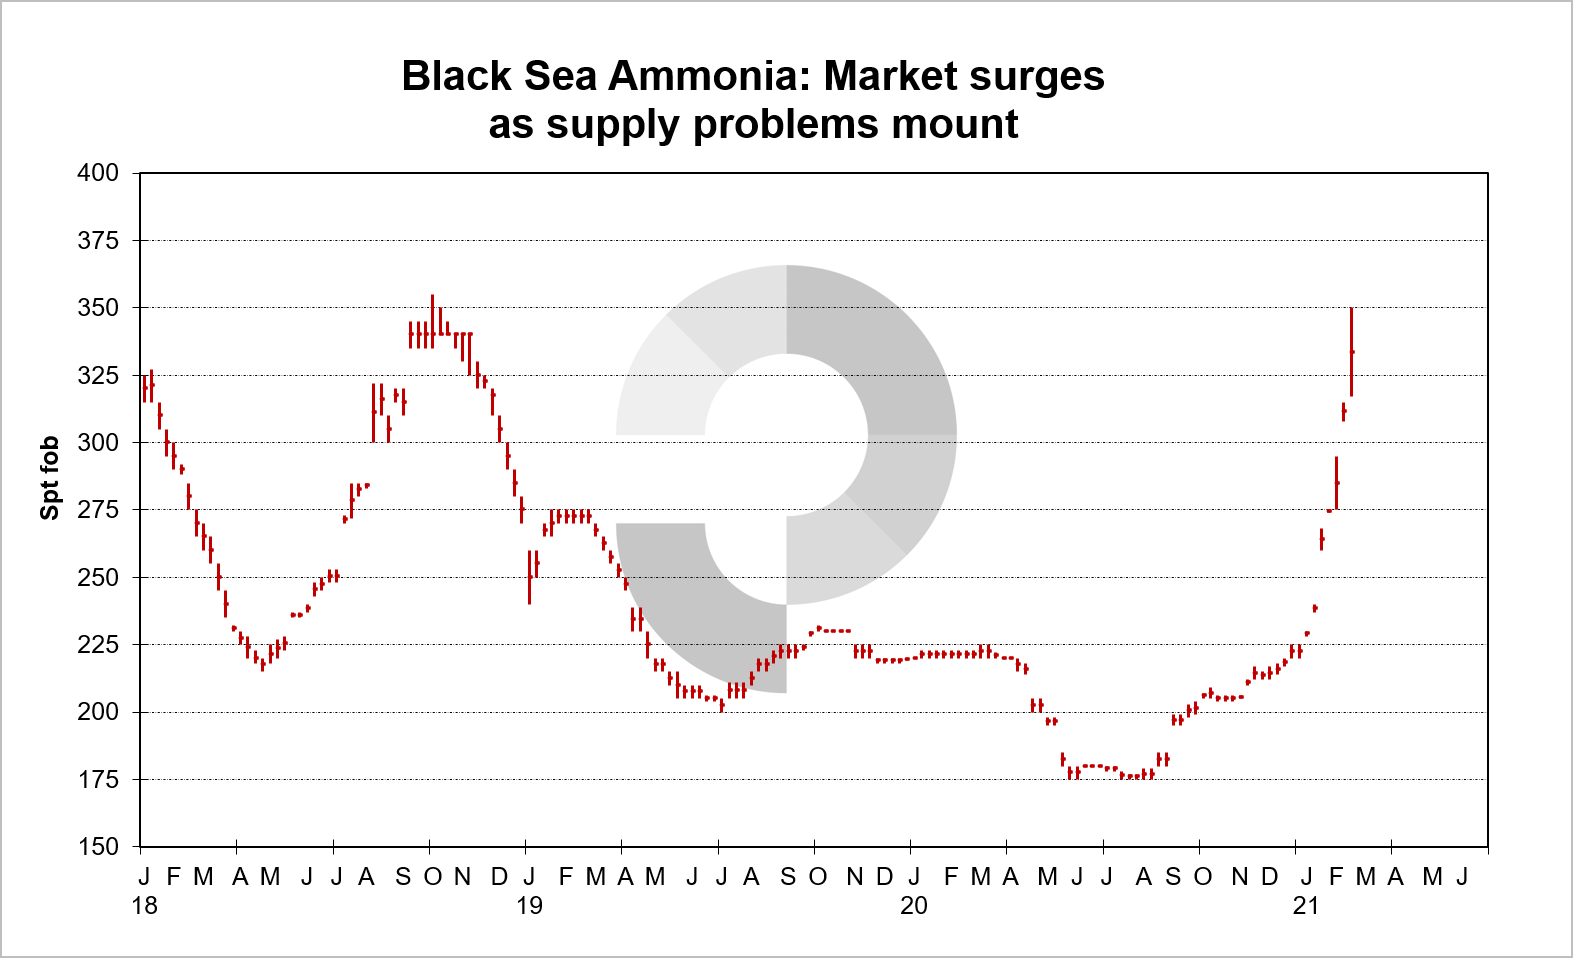 Ammonia: Market surges as supply problems mount